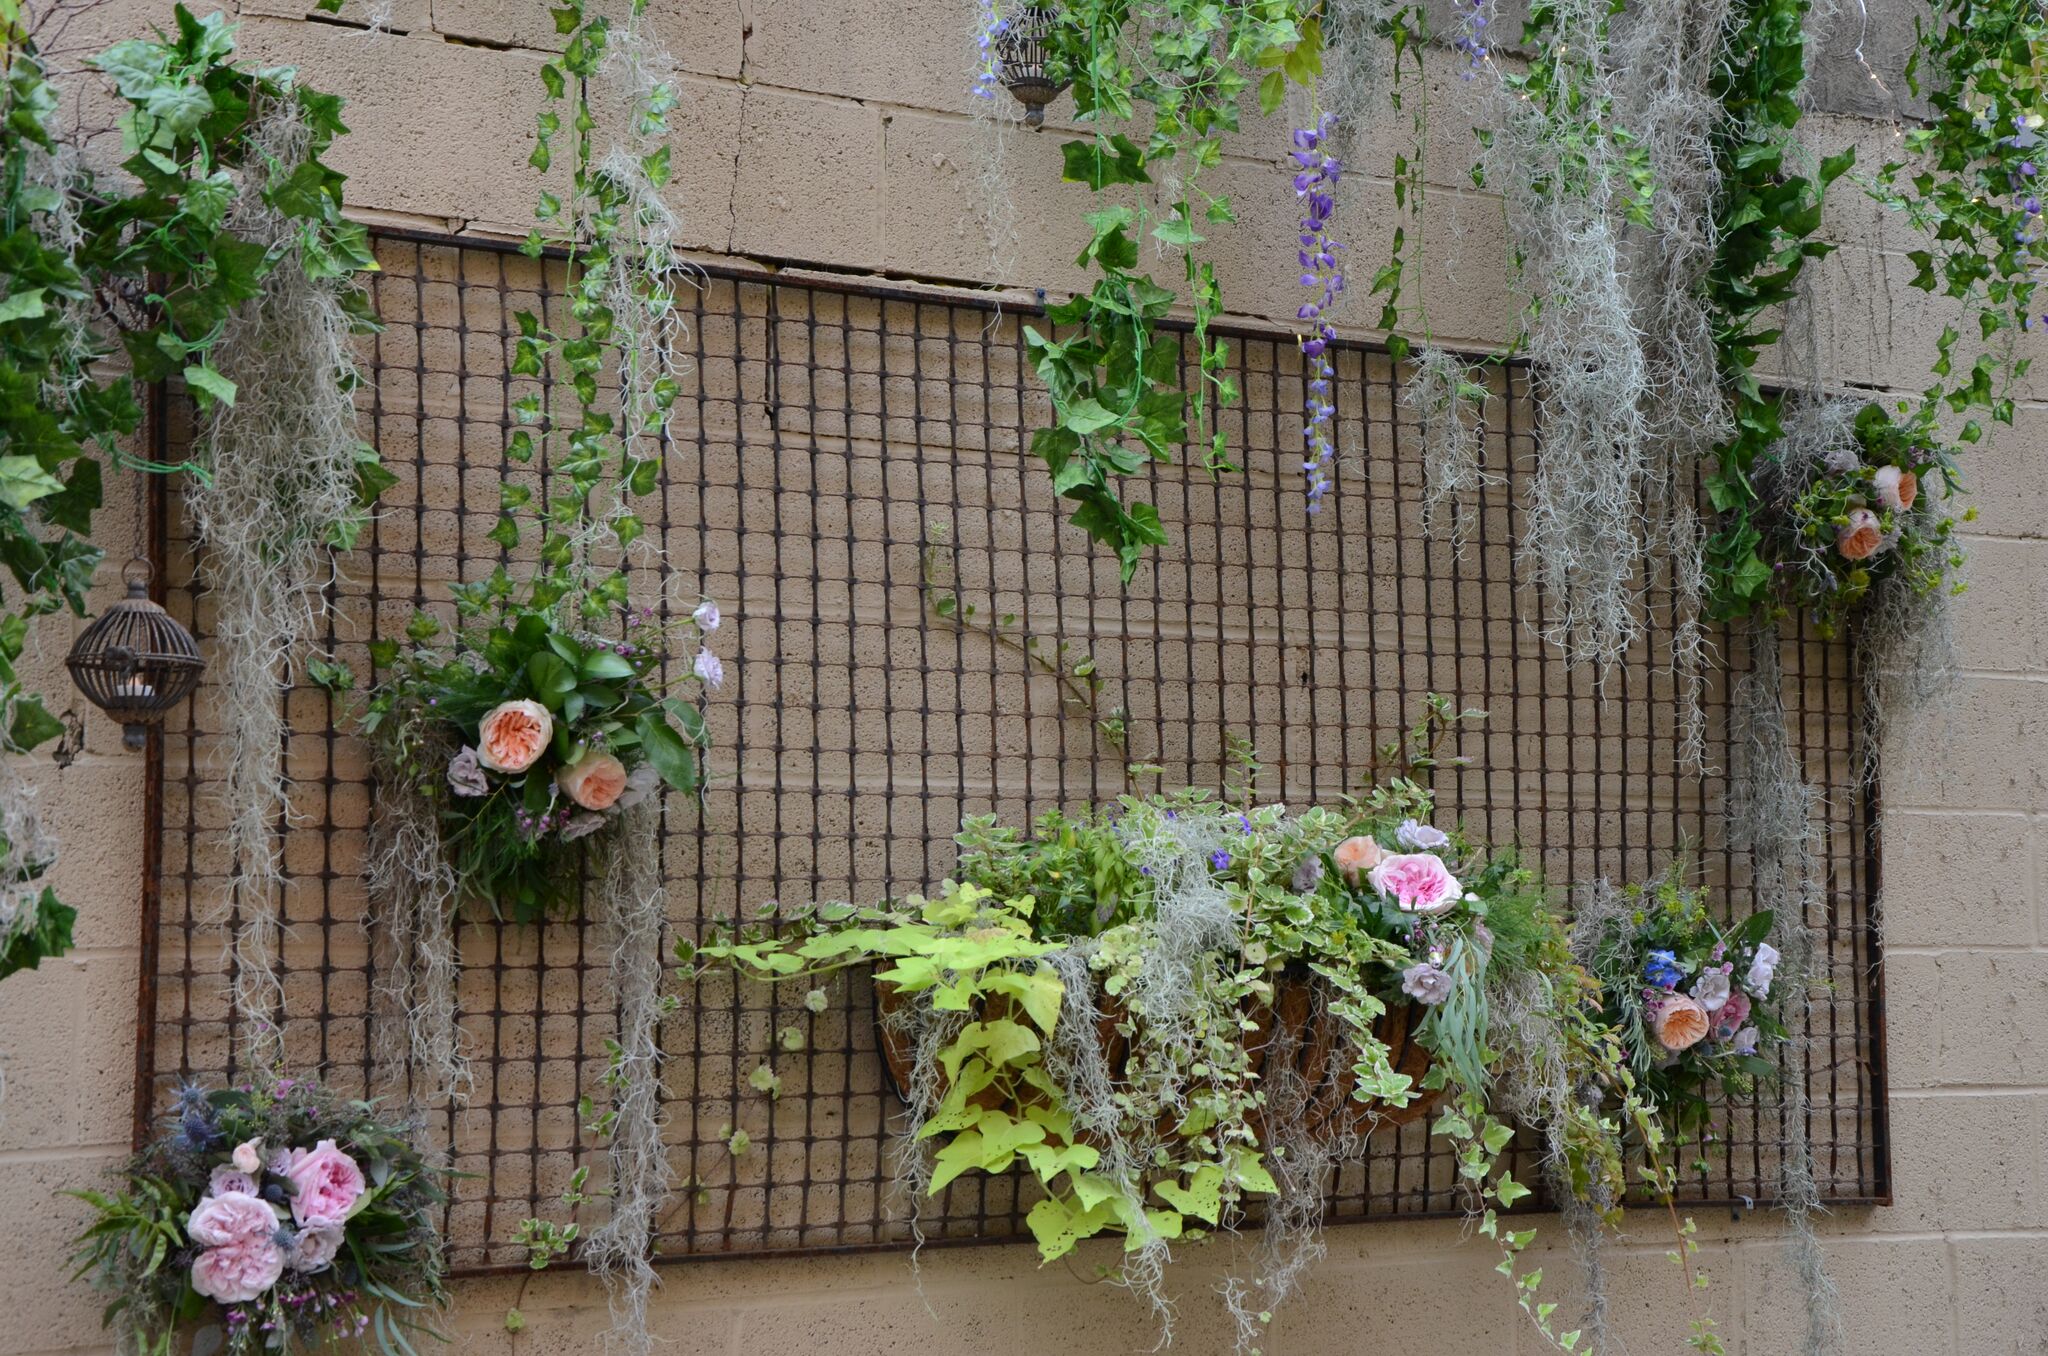 Greenery along wall in Garden Courtyard at Excelsior event venue